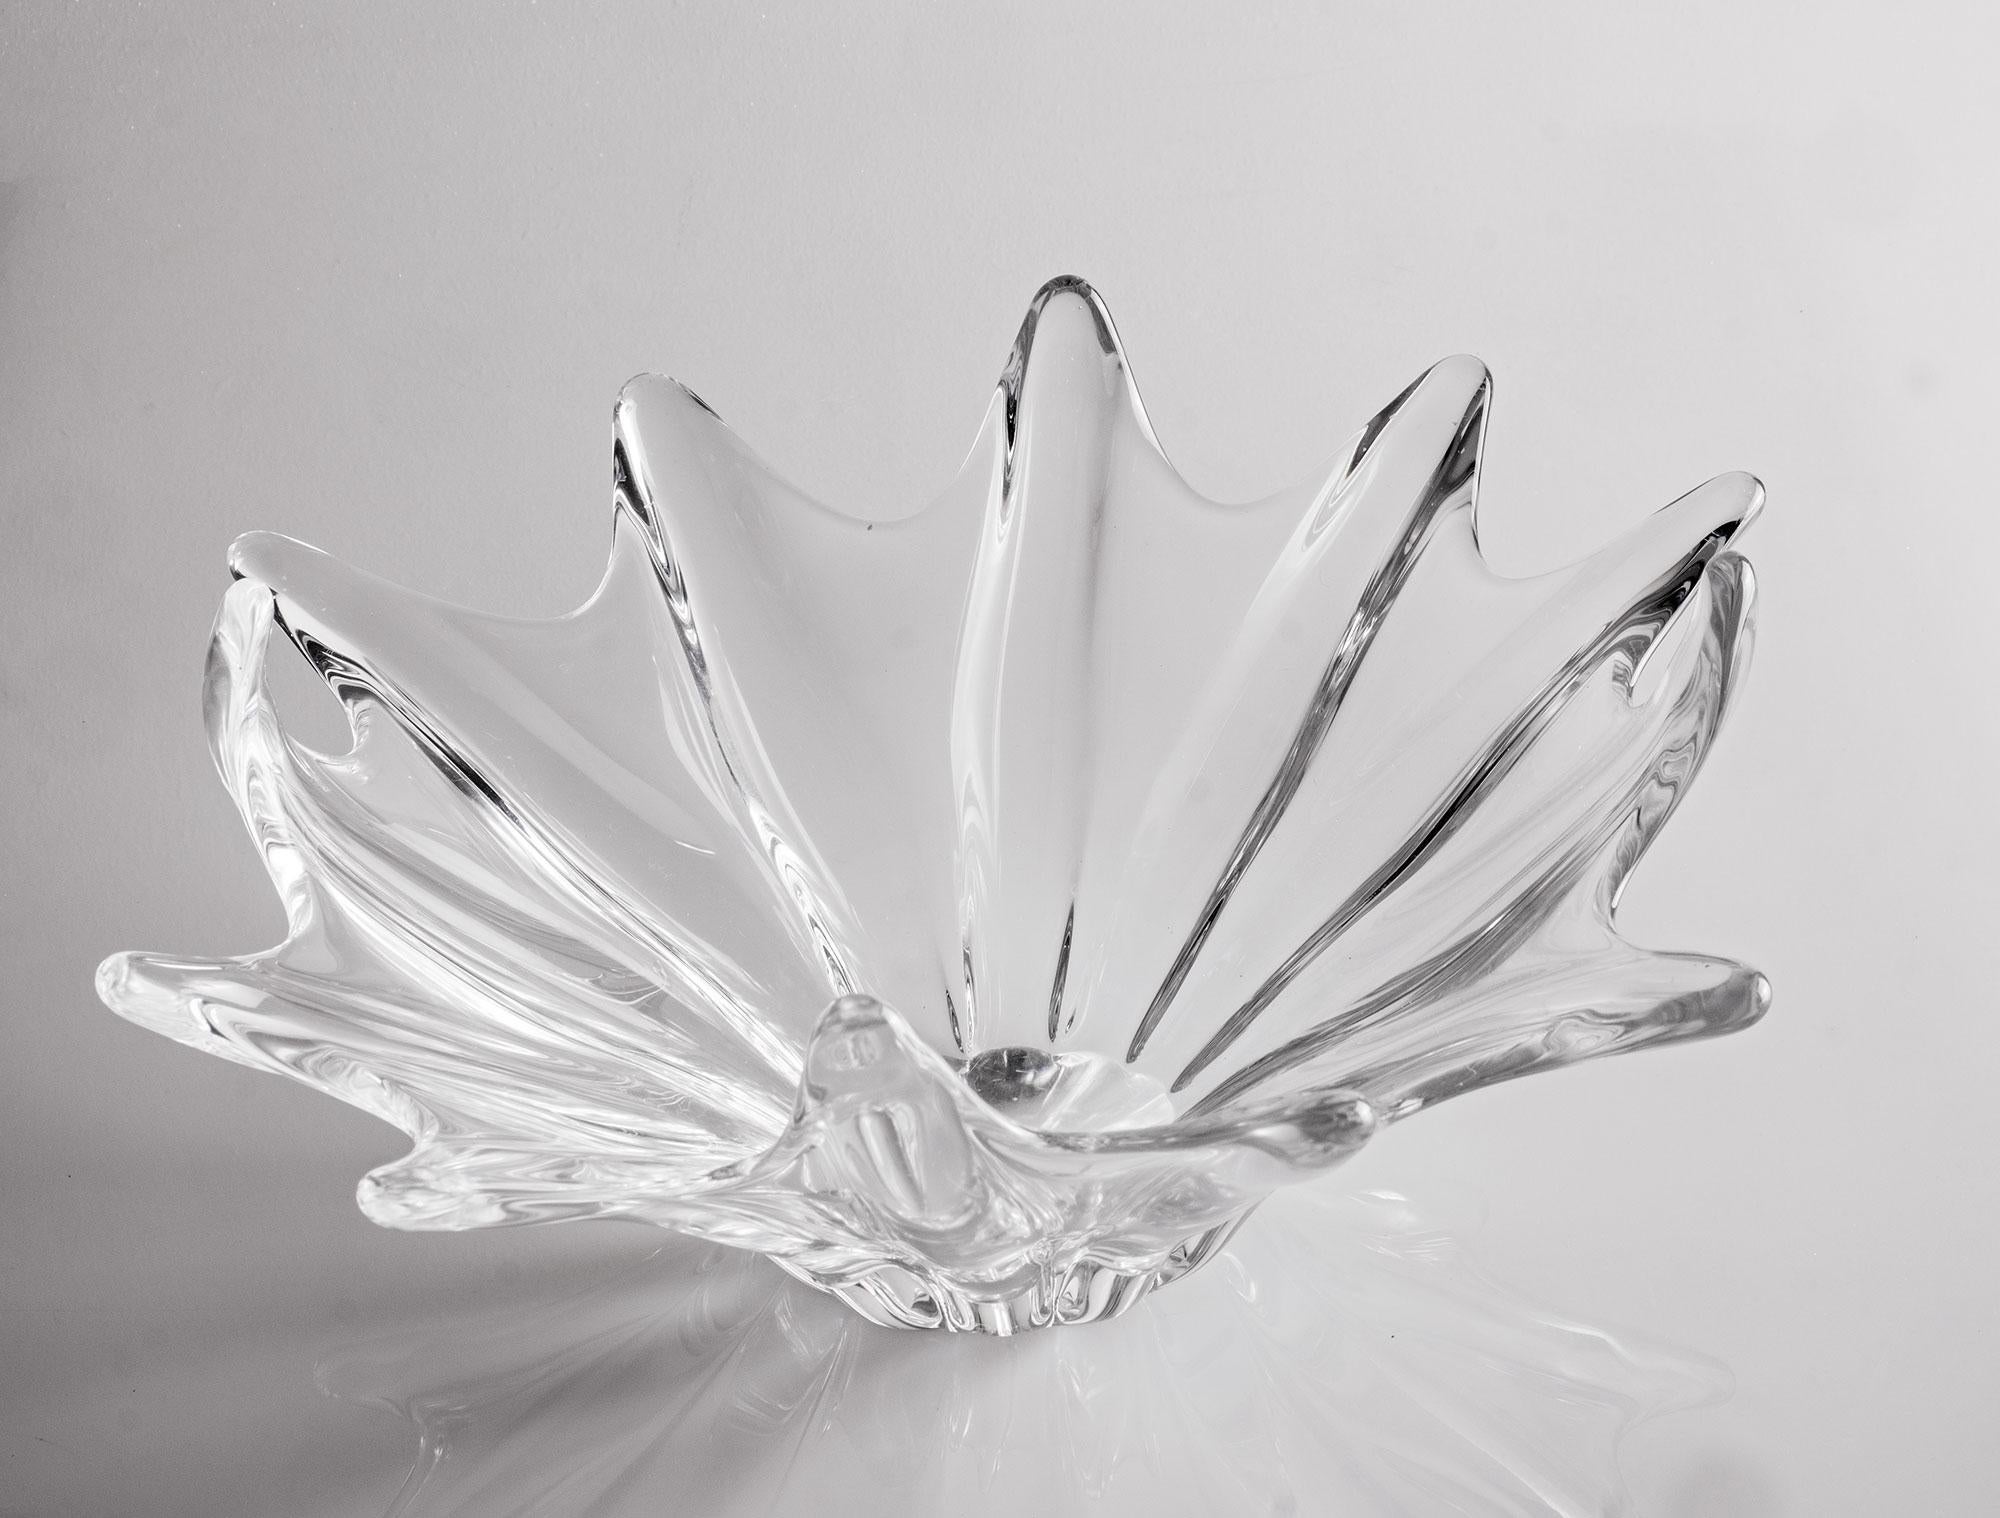 Splendid large sculptural crystal glass centerpiece by Daum France. 
Signed Daum France with the cross of Lorraine.